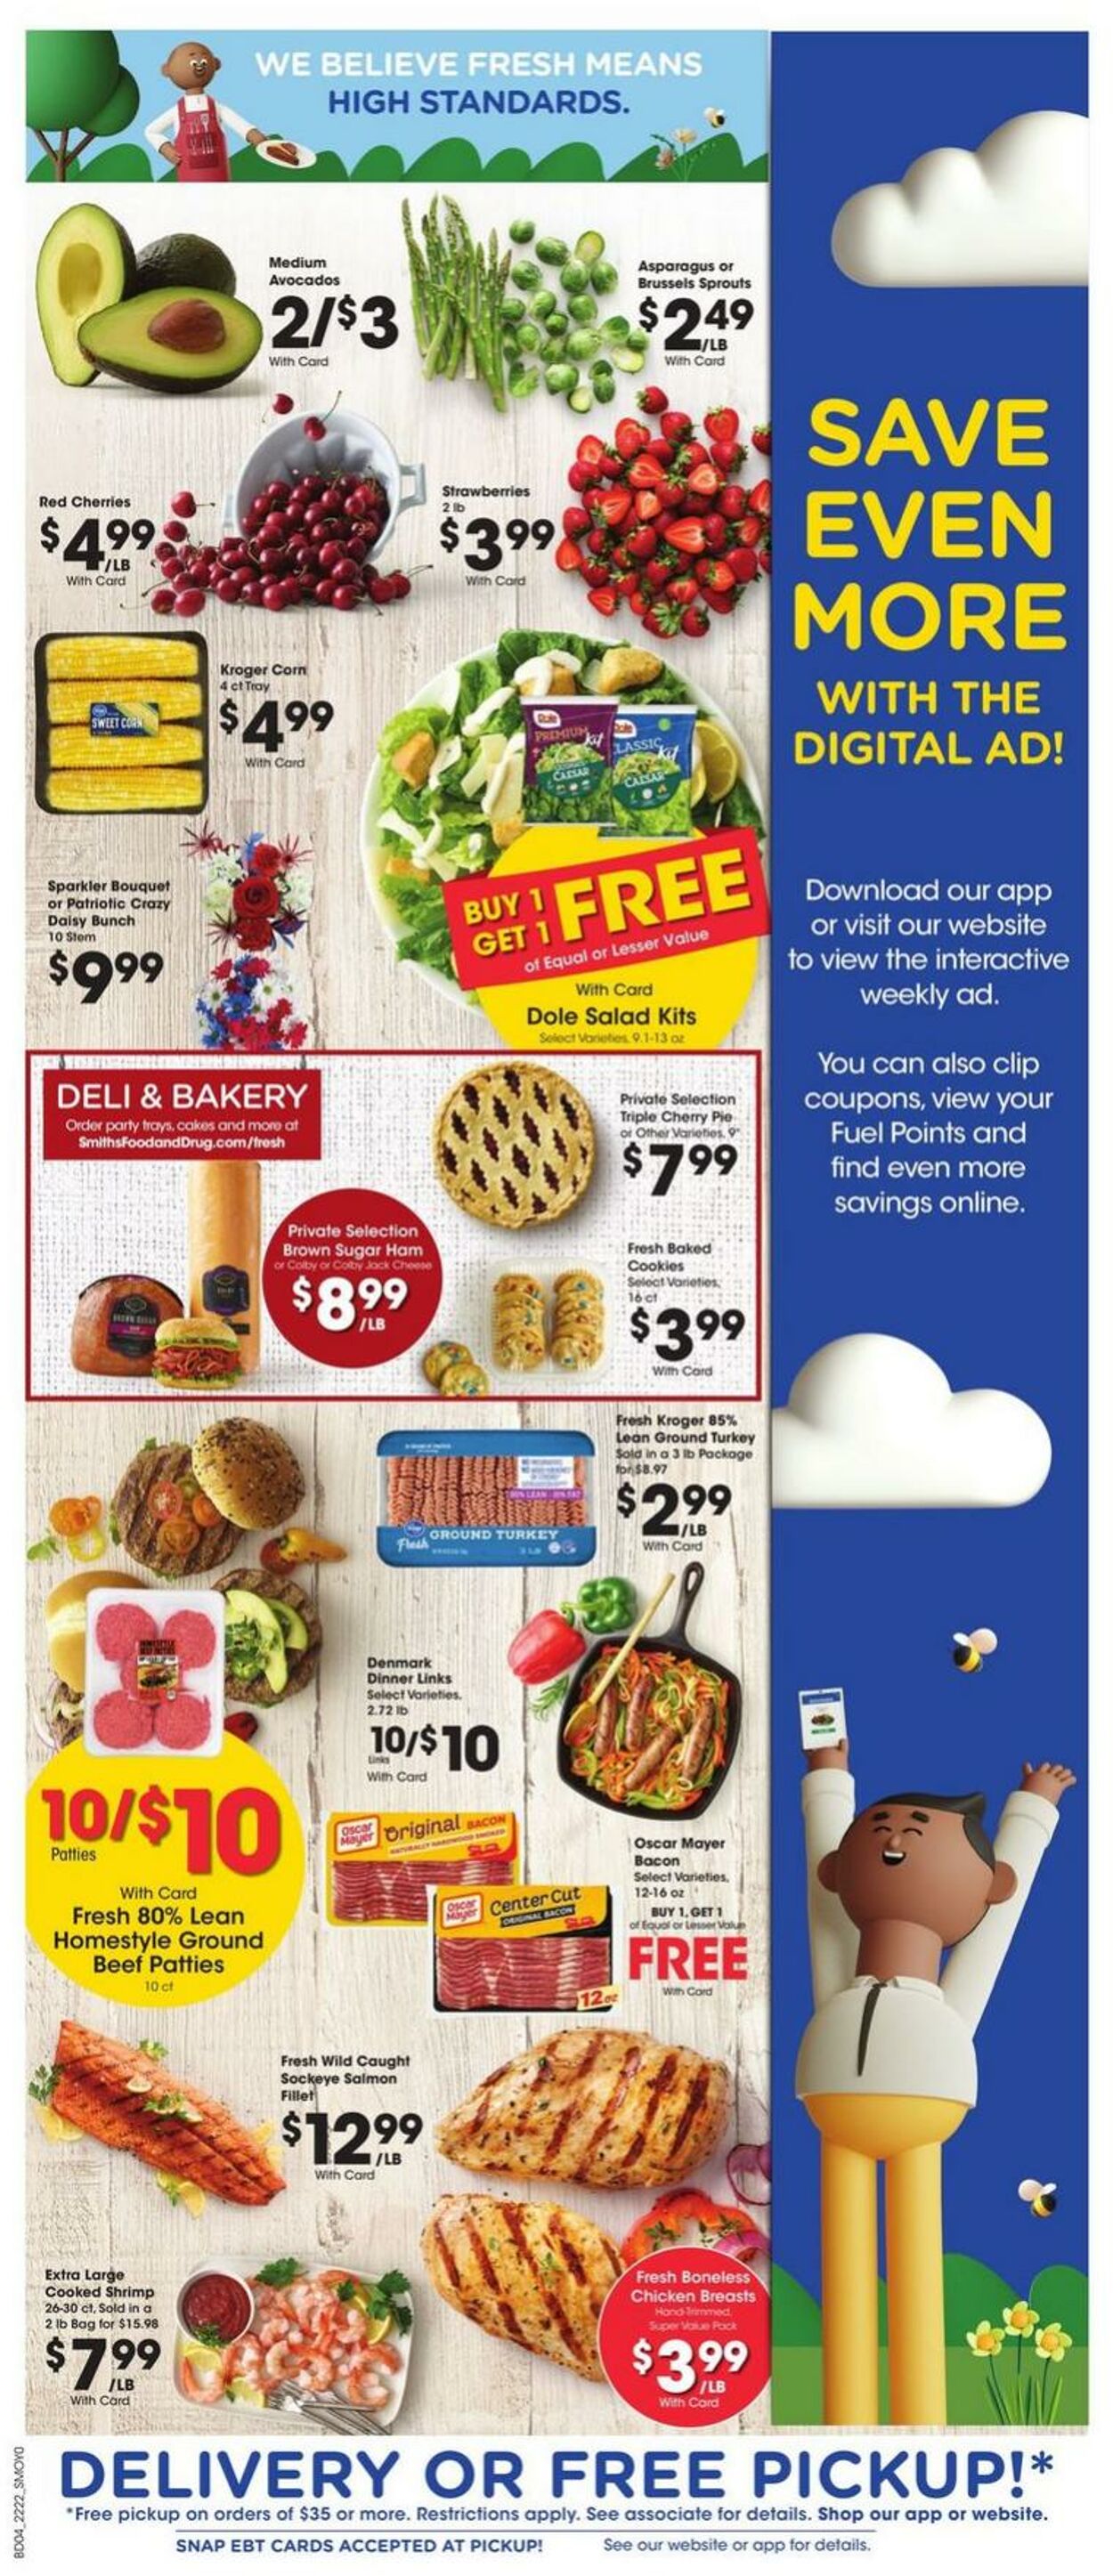 Weekly ad Smith’s Food and Drug 06/29/2022 - 07/05/2022